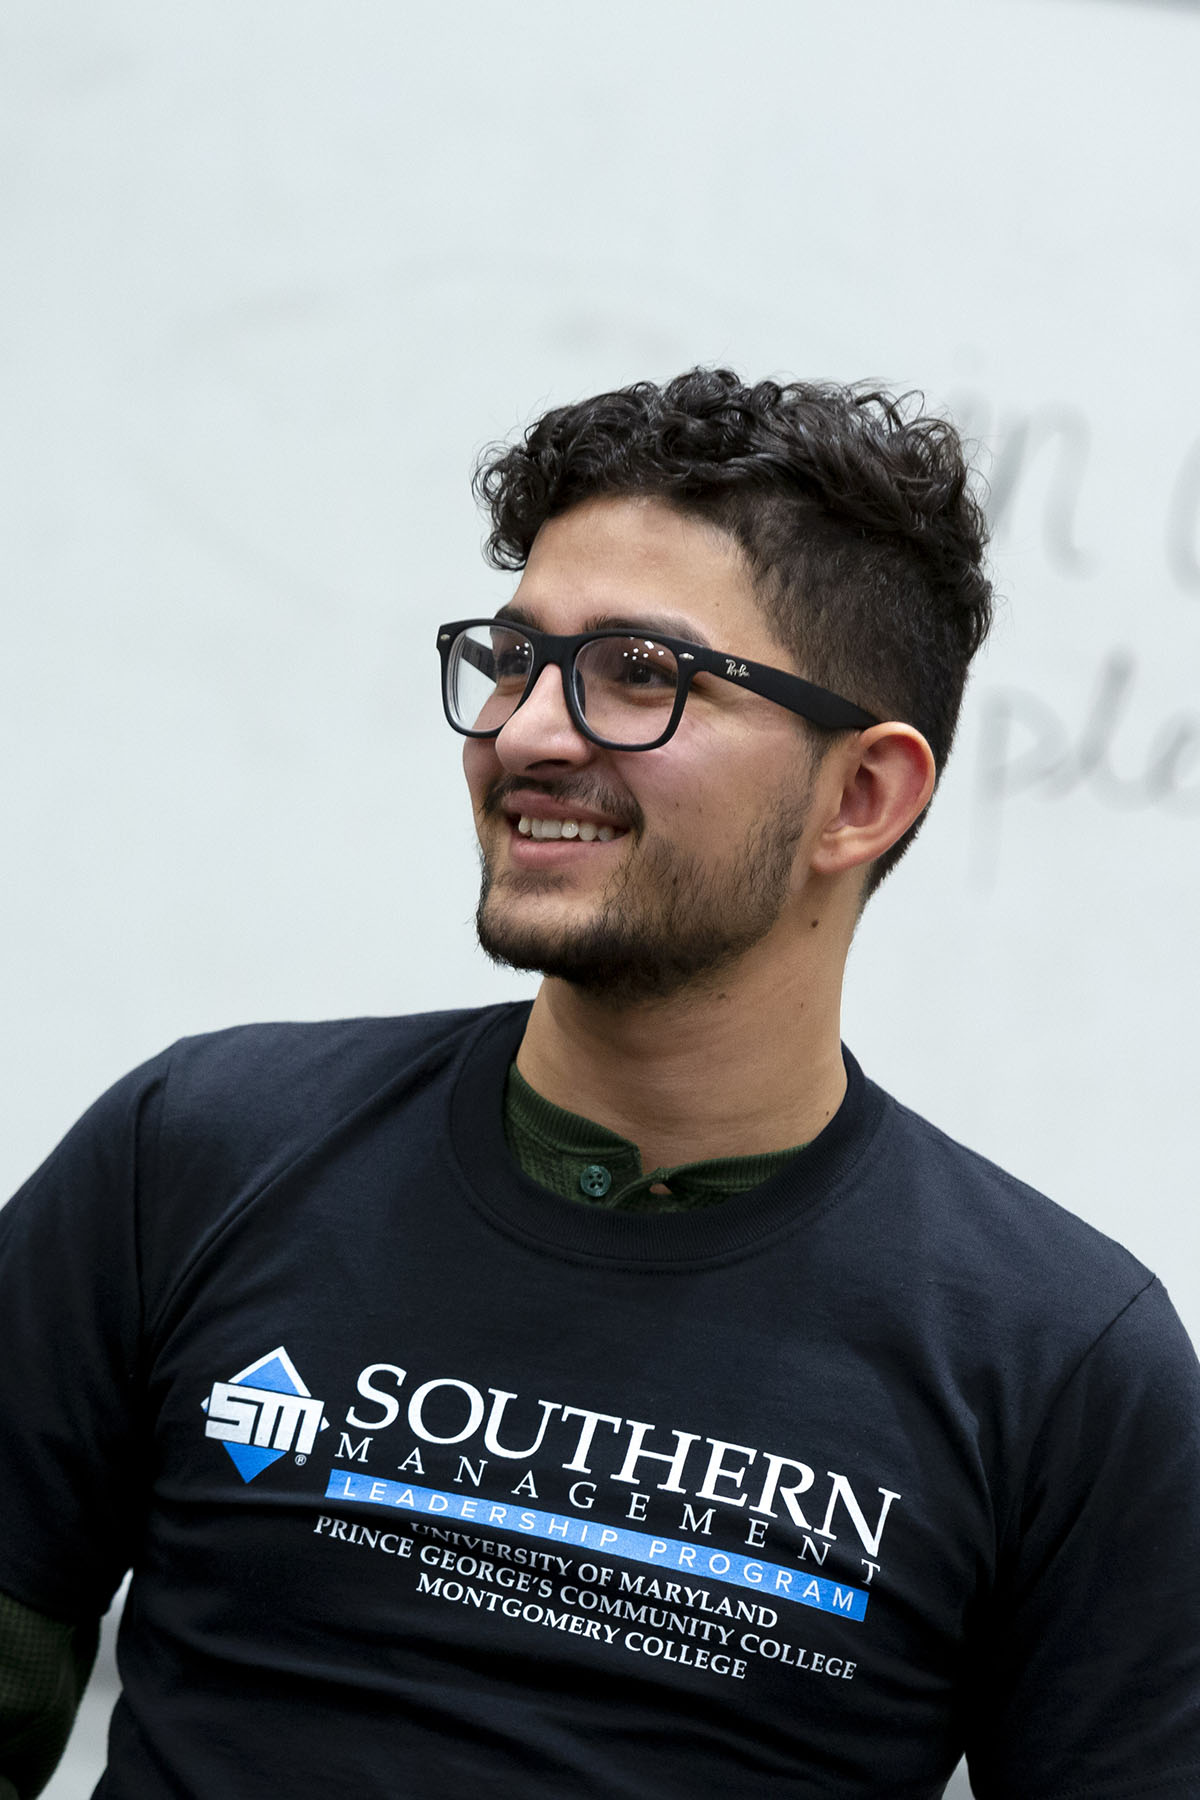 man with glasses and SMLP shirt smiling